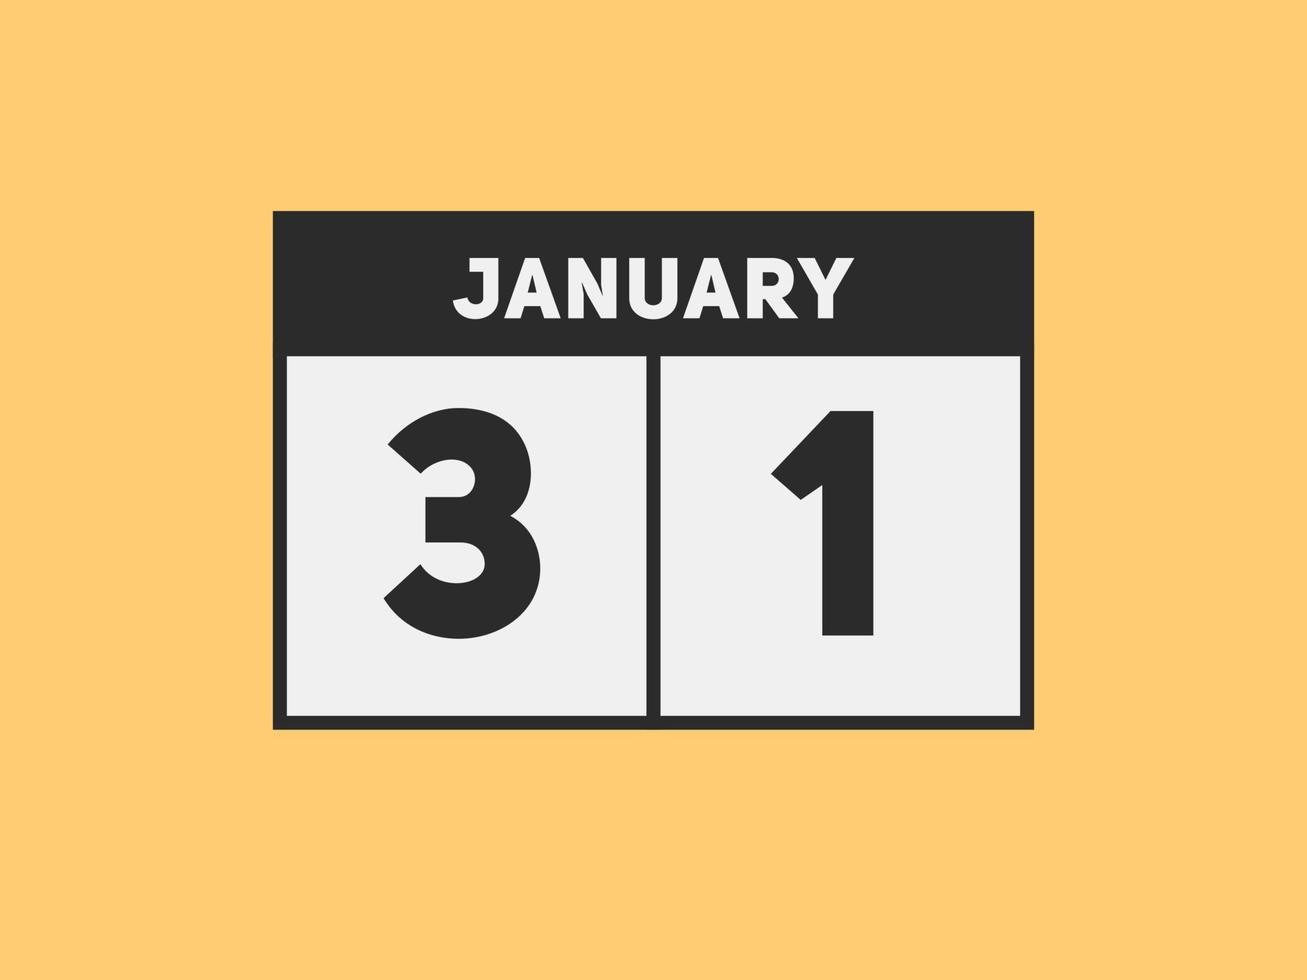 january 31 calendar reminder. 31th january daily calendar icon template. Calendar 31th january icon Design template. Vector illustration